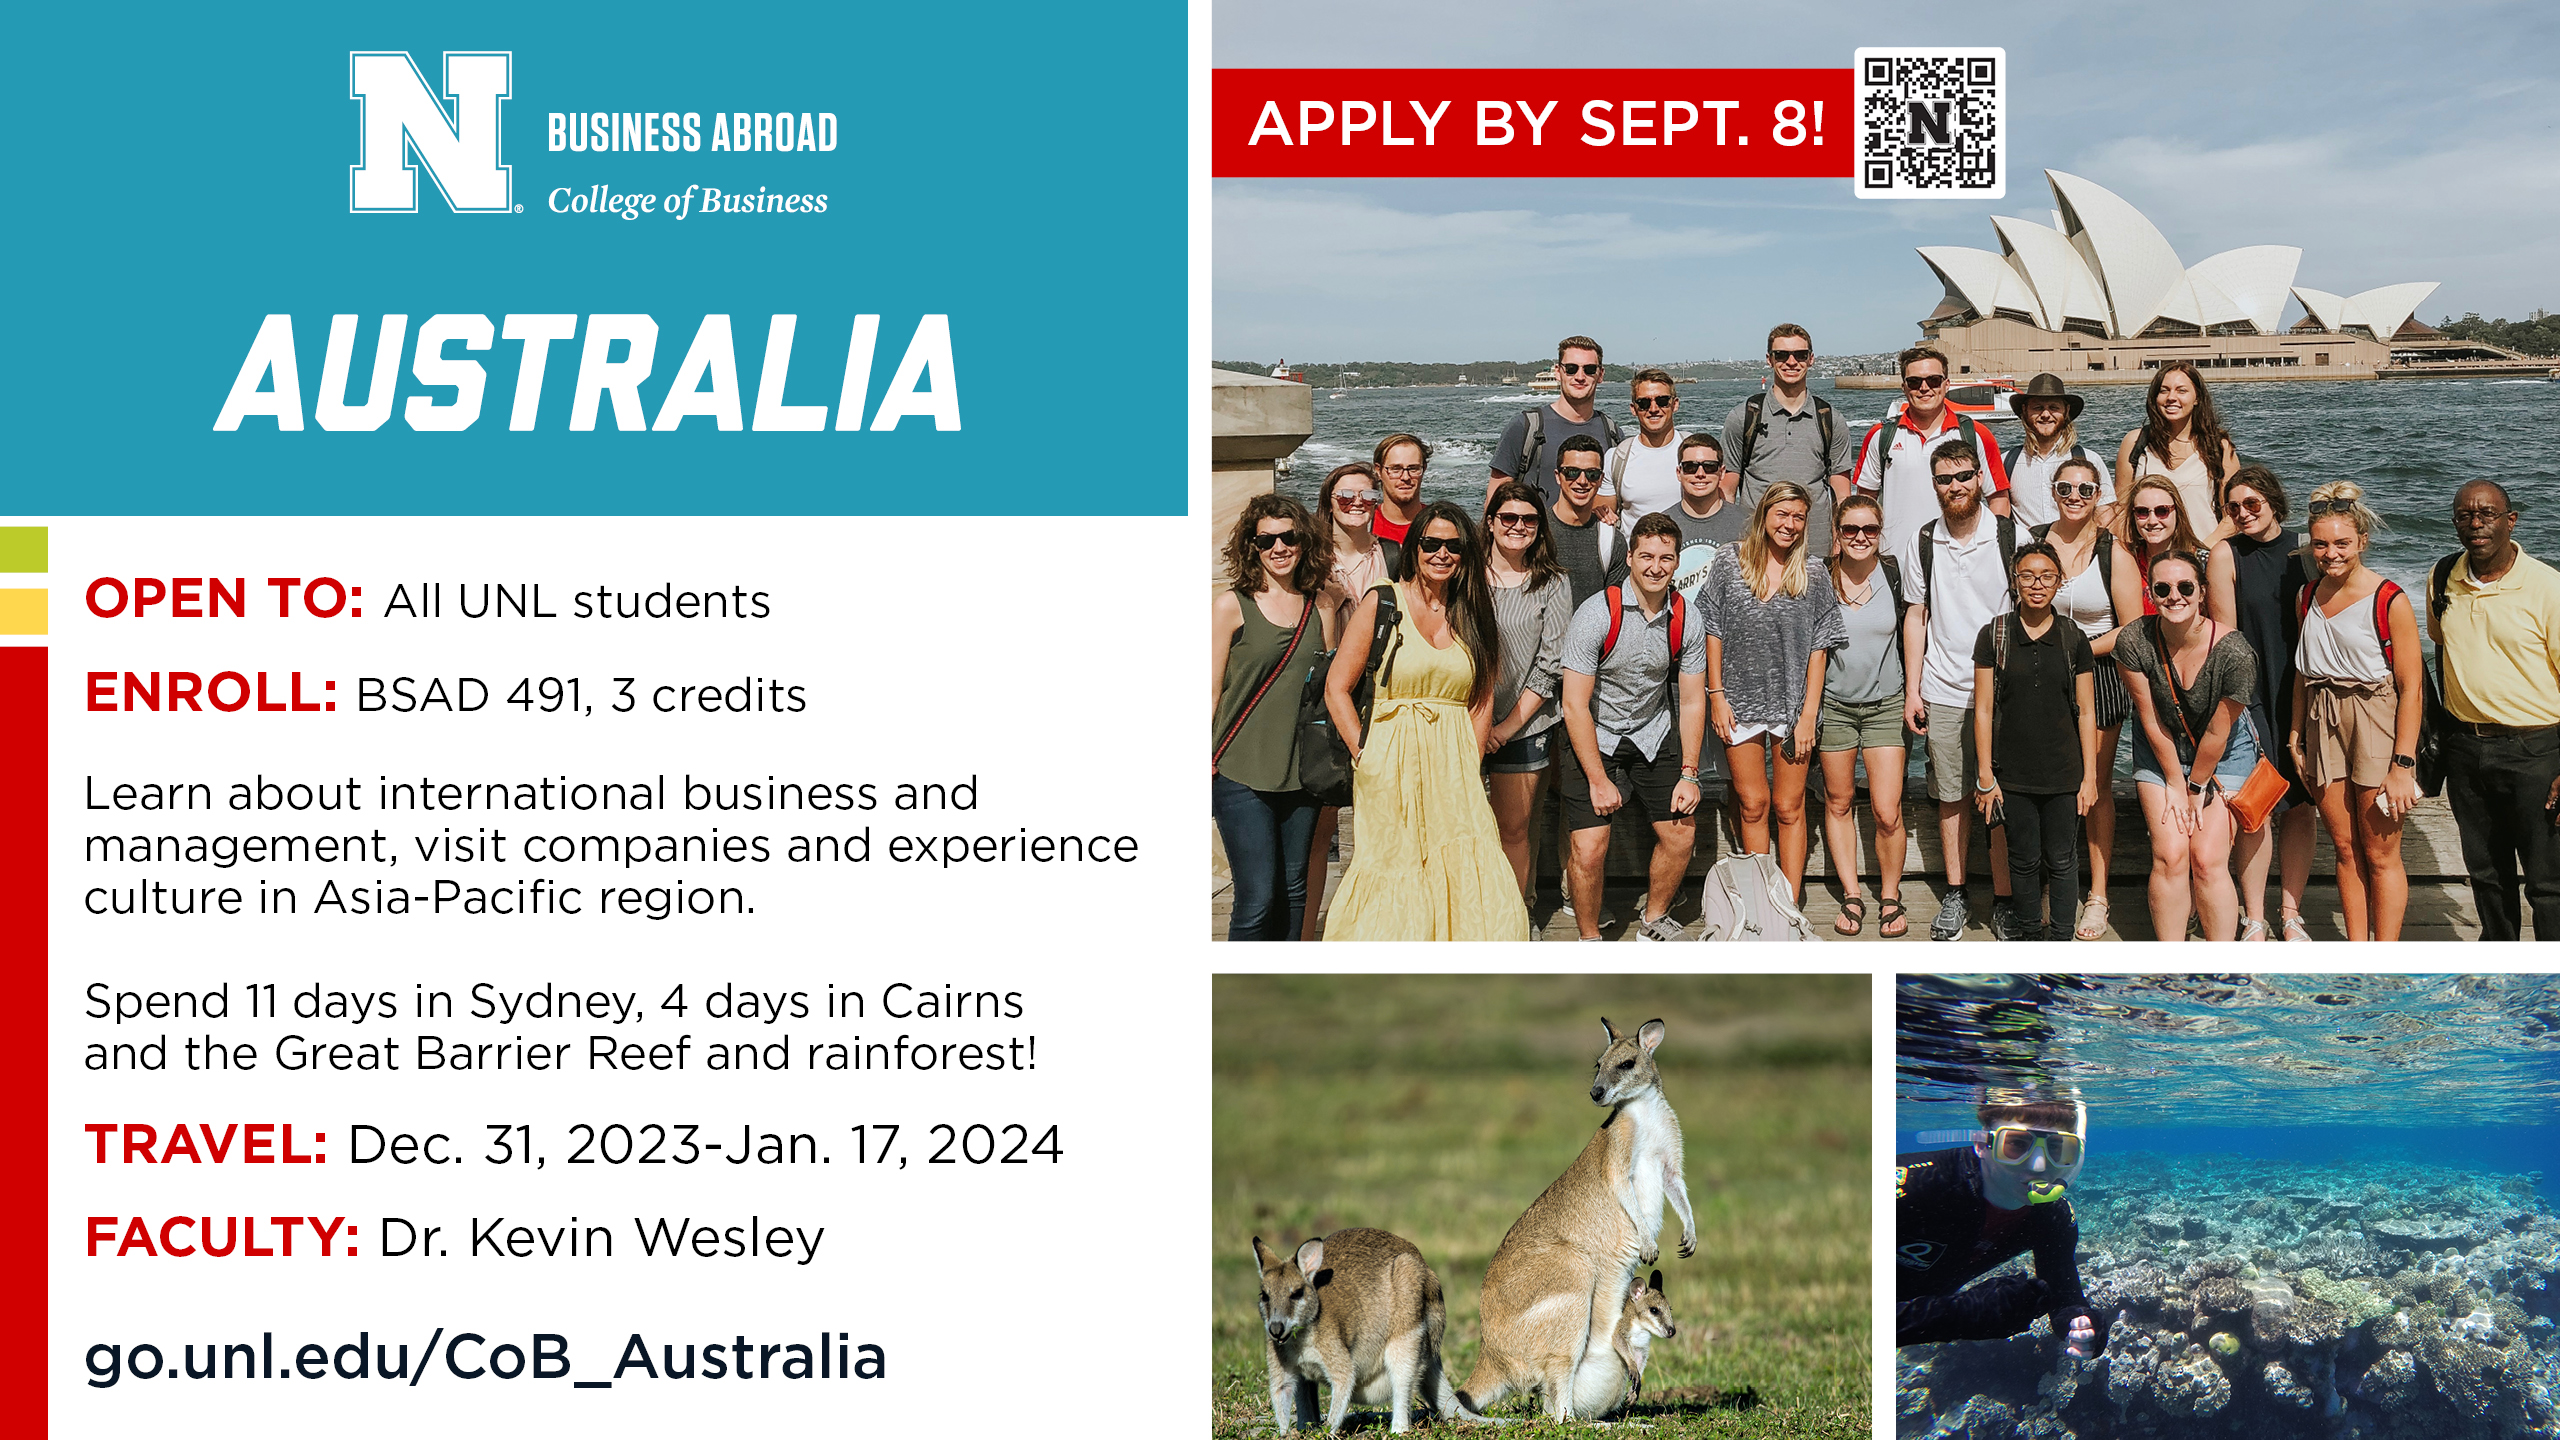 Applications for Study Abroad Australia are open!